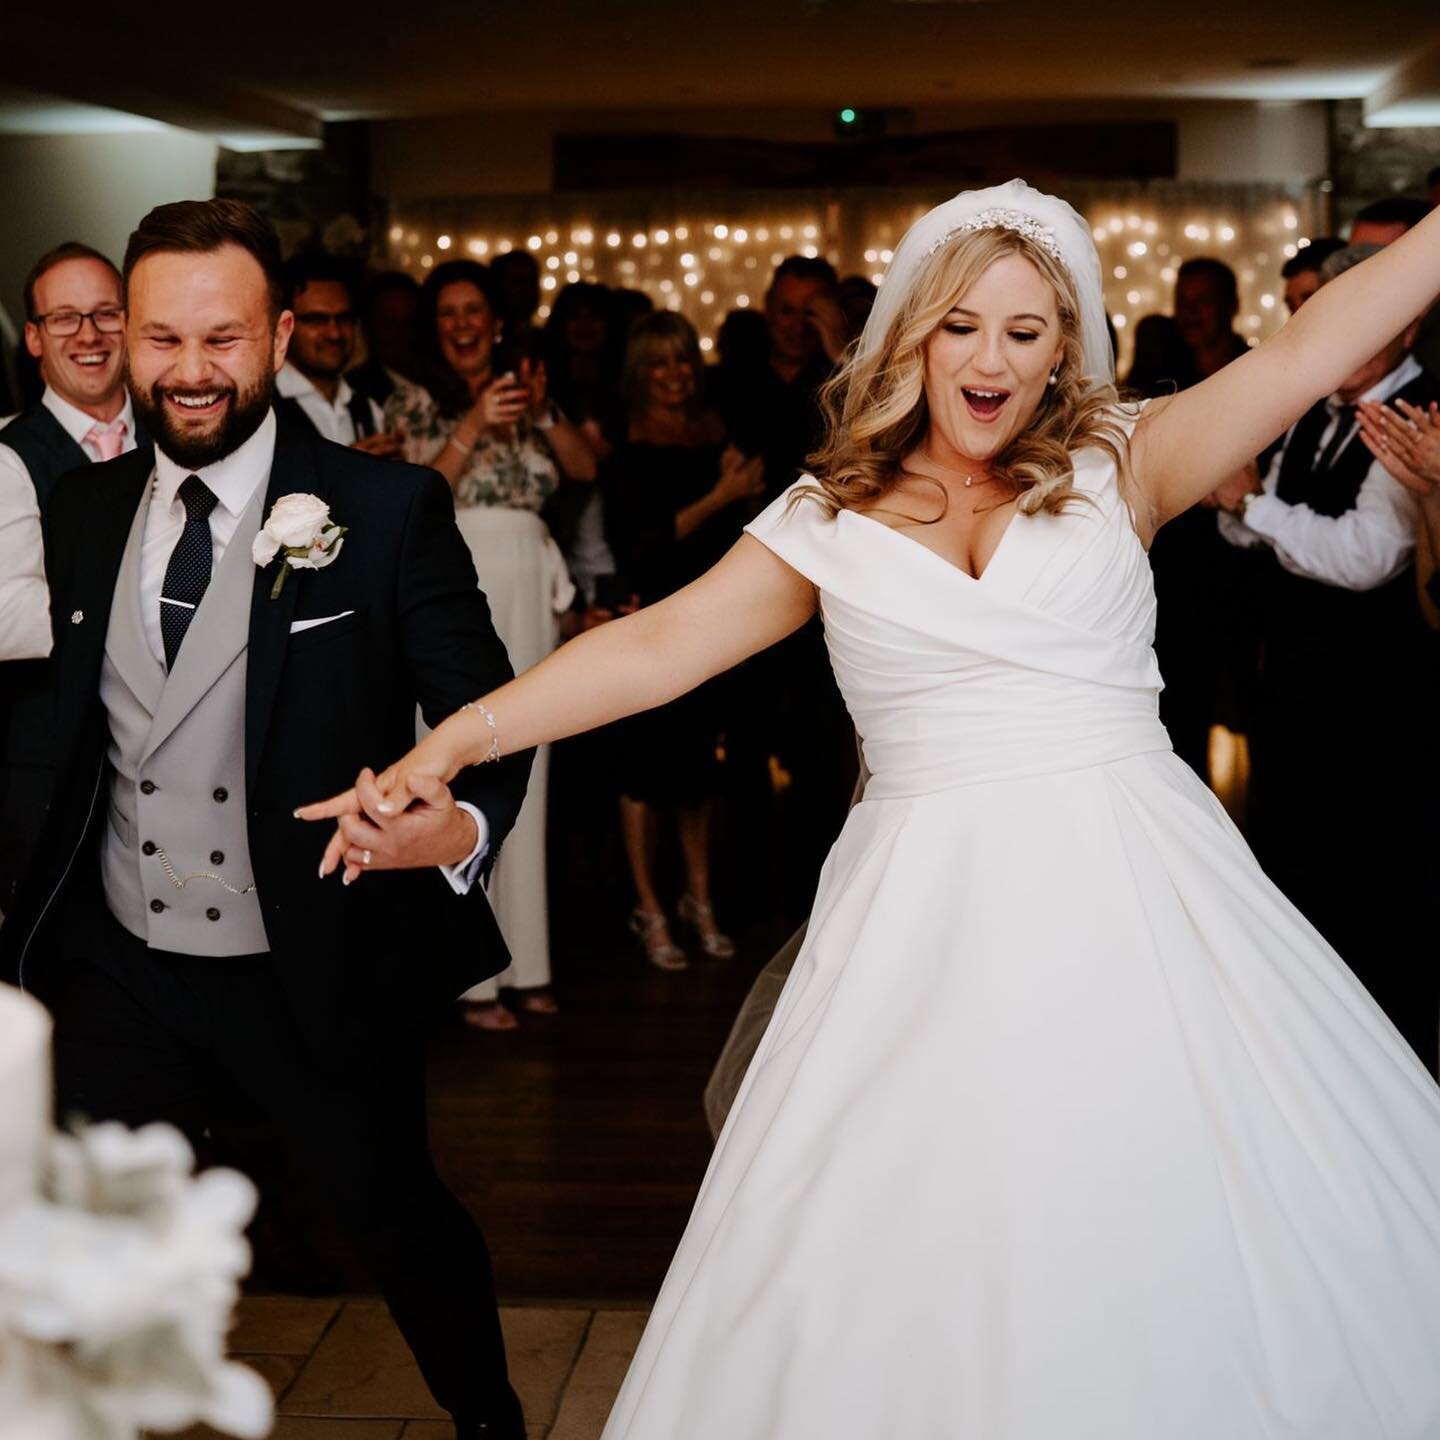 Emma &amp; Sean got married at Beeston Manor!! How fabulous are these pictures?!😍 swipe to see the most lovely review, thank you to the new Mr &amp; Mrs Burns ✨✨✨✨✨✨✨

Photography by @brightsightphotography 😍 📸